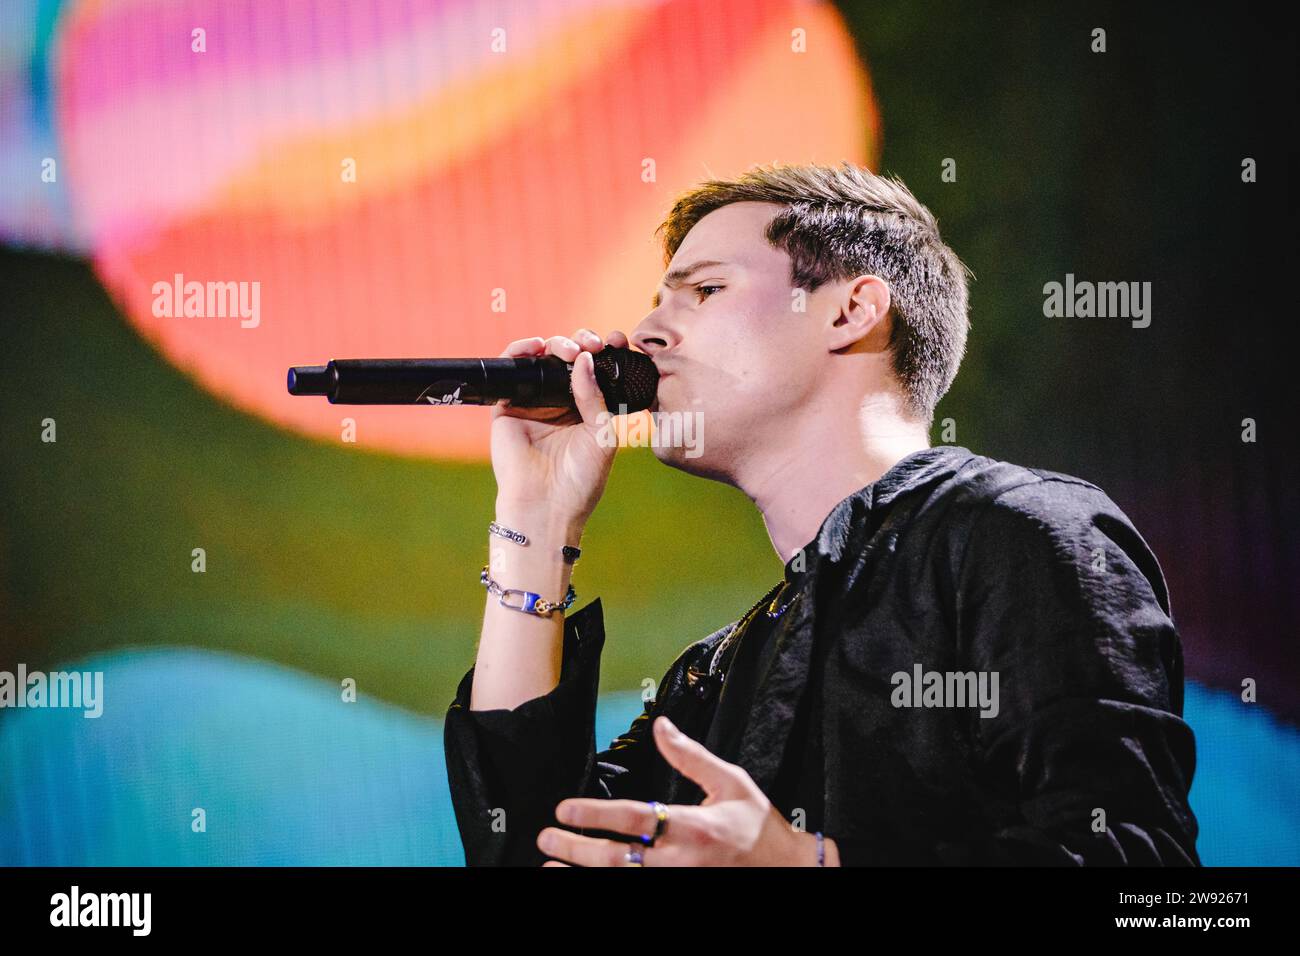 Zurich, Switzerland. 15th, December 2023. The English singer and songwriter Tom Gregory performs live during the Energy Star Night 2023 at St. Jakob Halle in Basel. (Photo credit: Gonzales Photo - Tilman Jentzsch). Stock Photo